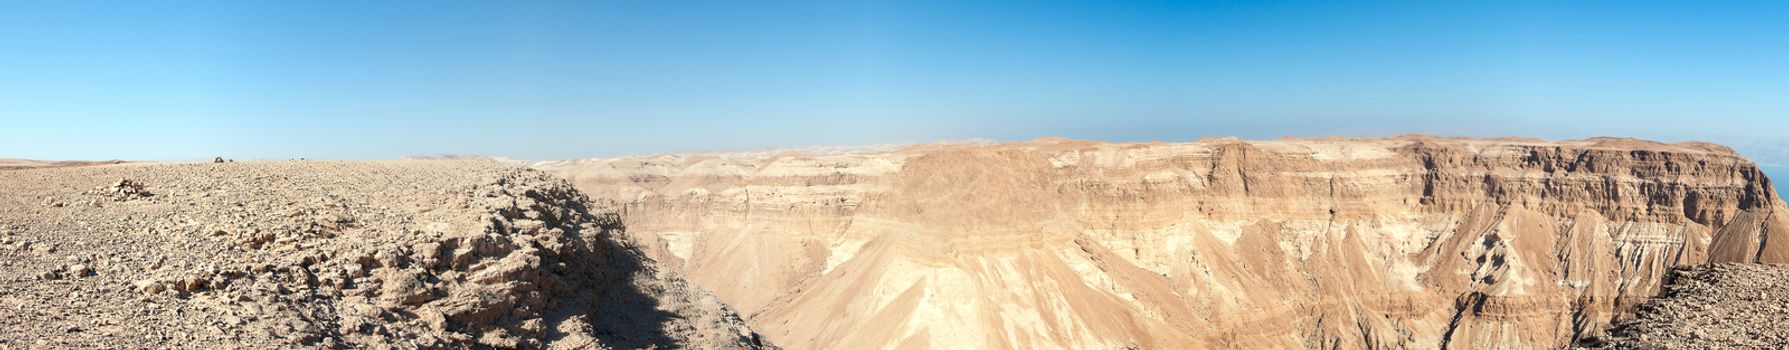 Wide panorama of stone desert mountains in Israel near Dead Sea